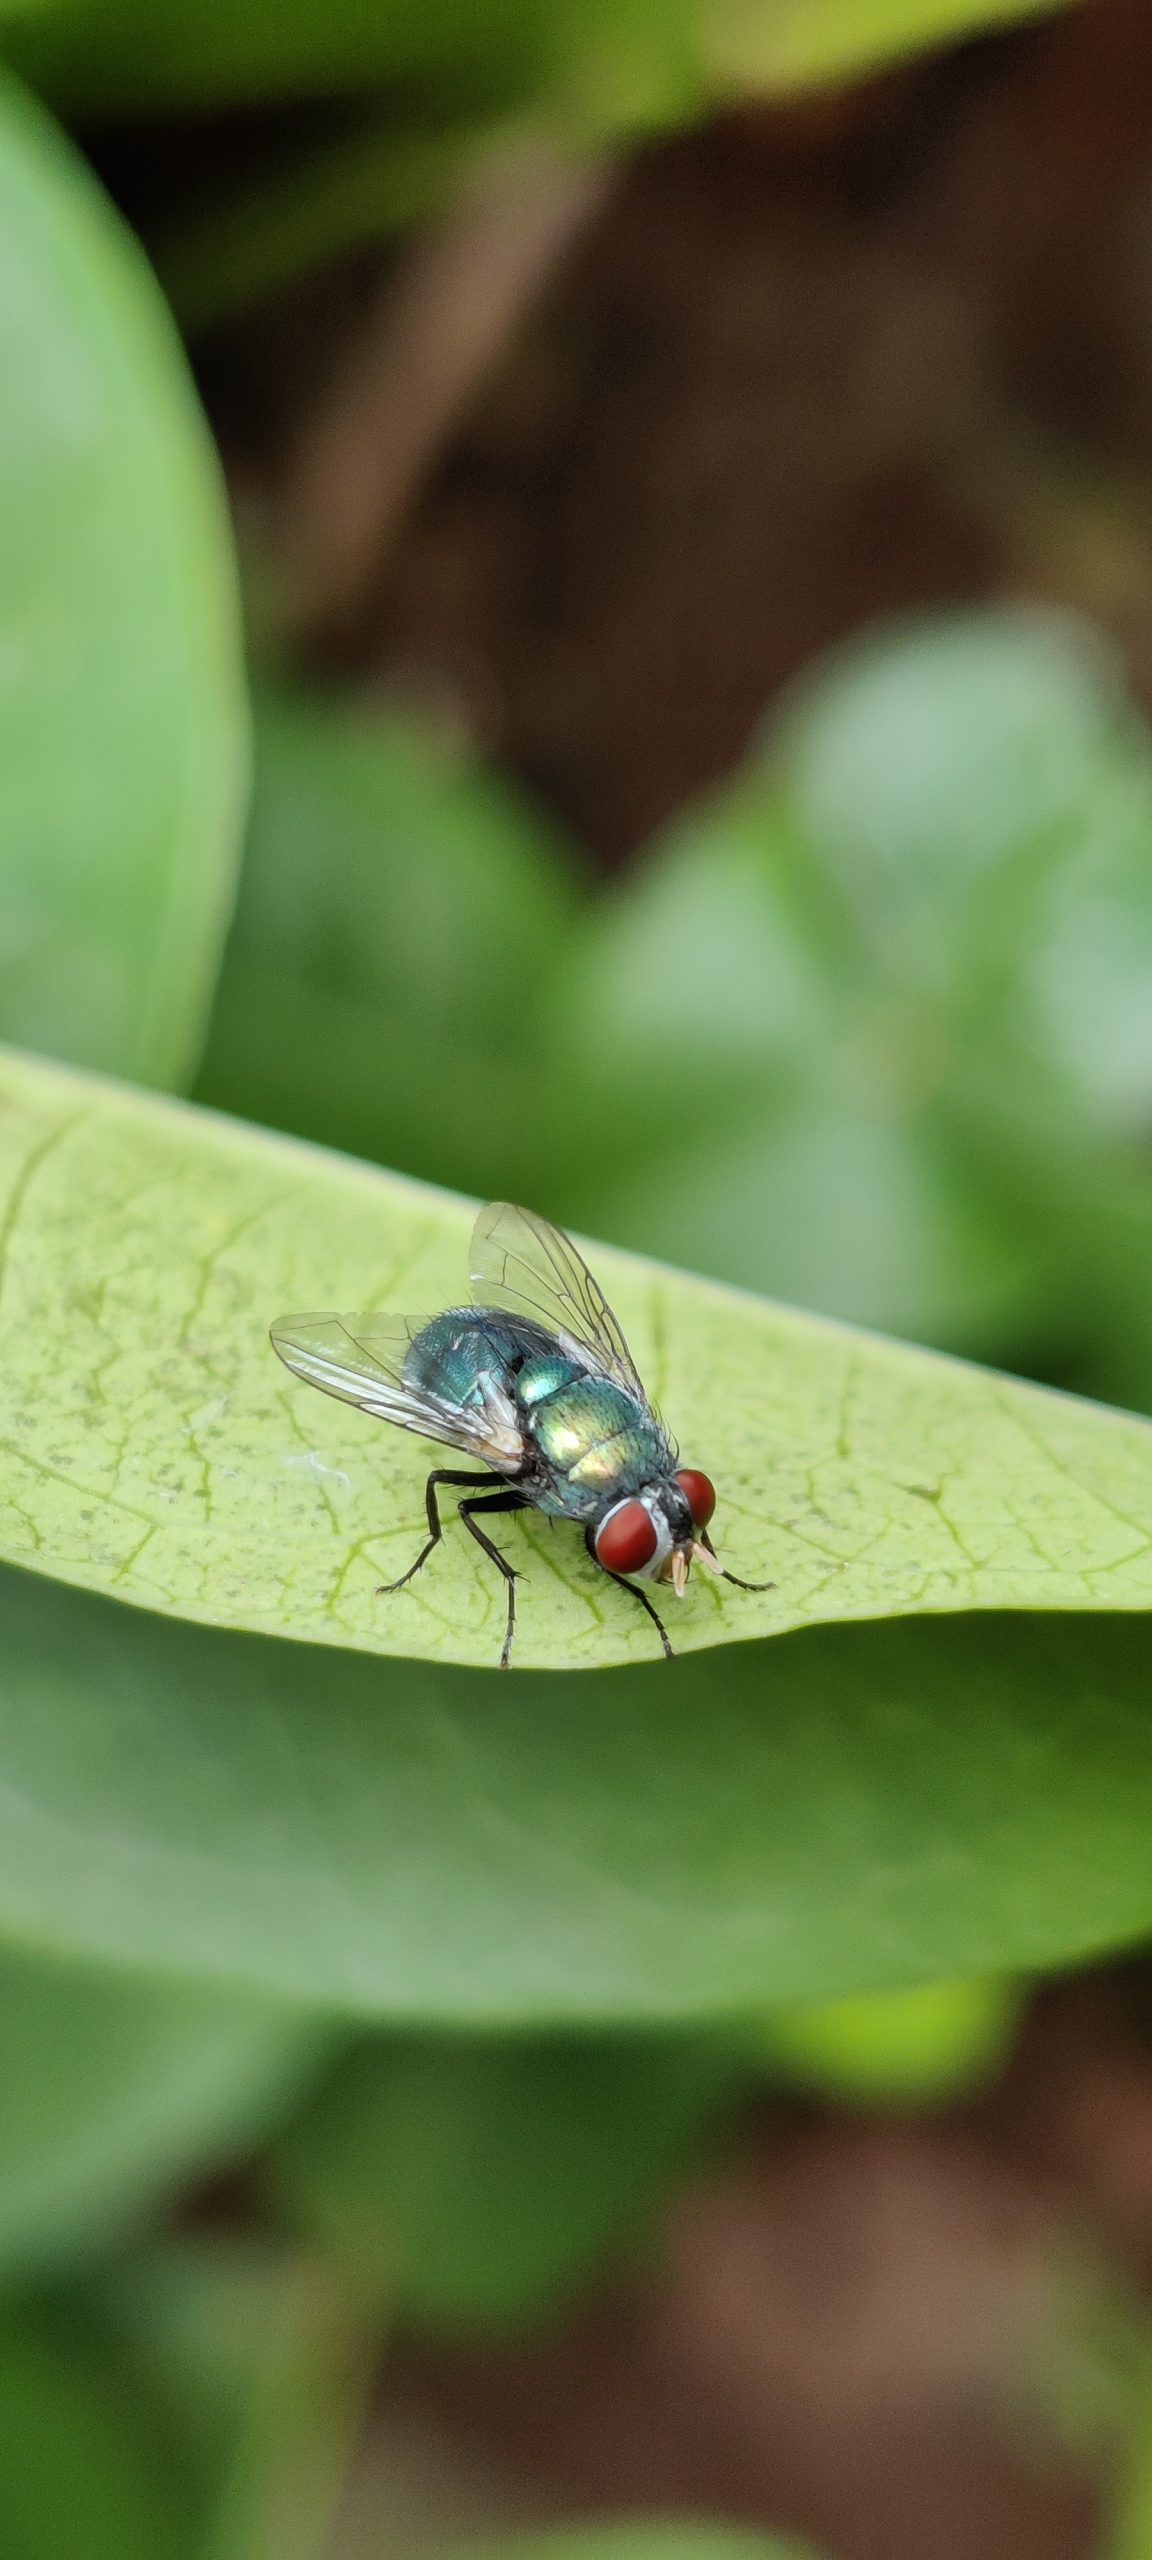 Housefly on the green leaf